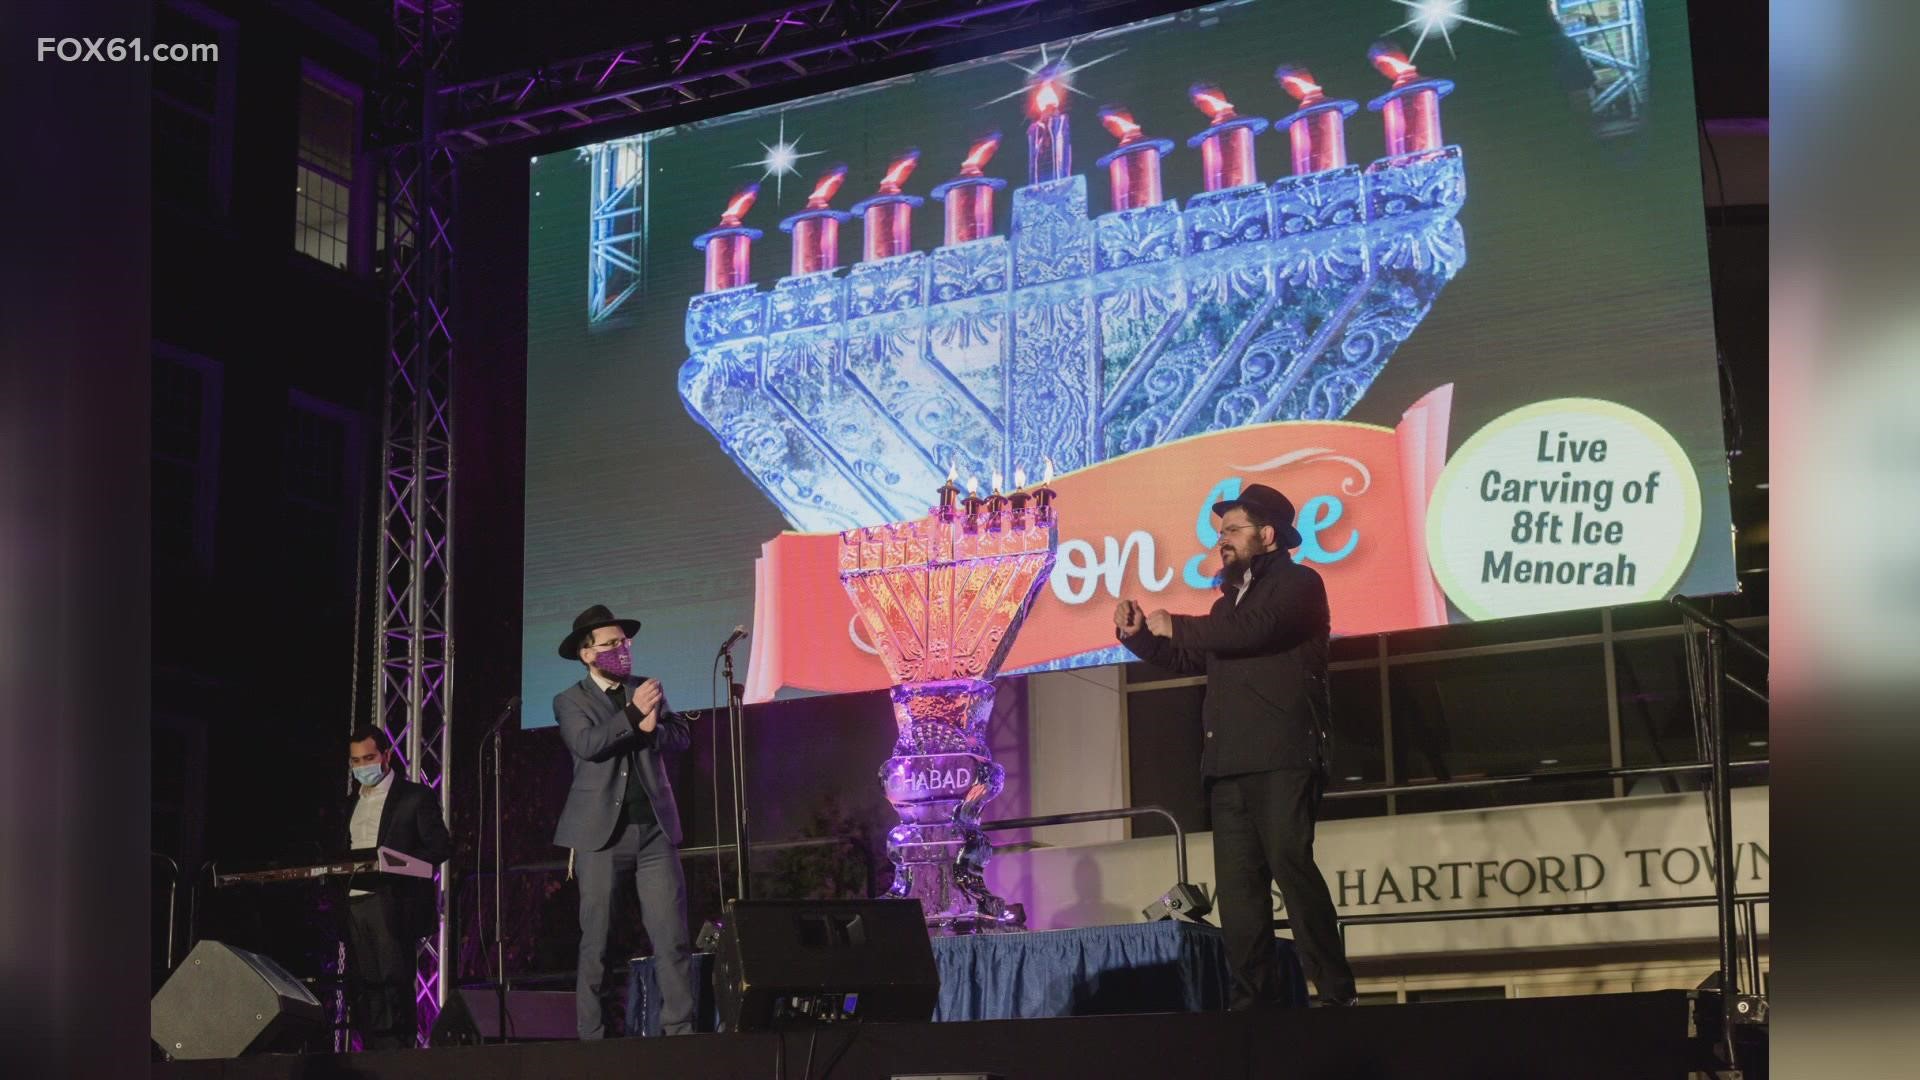 Chanukah Fire on ICE is taking place in West Hartford Center at 4 p.m. on Dec. 18.